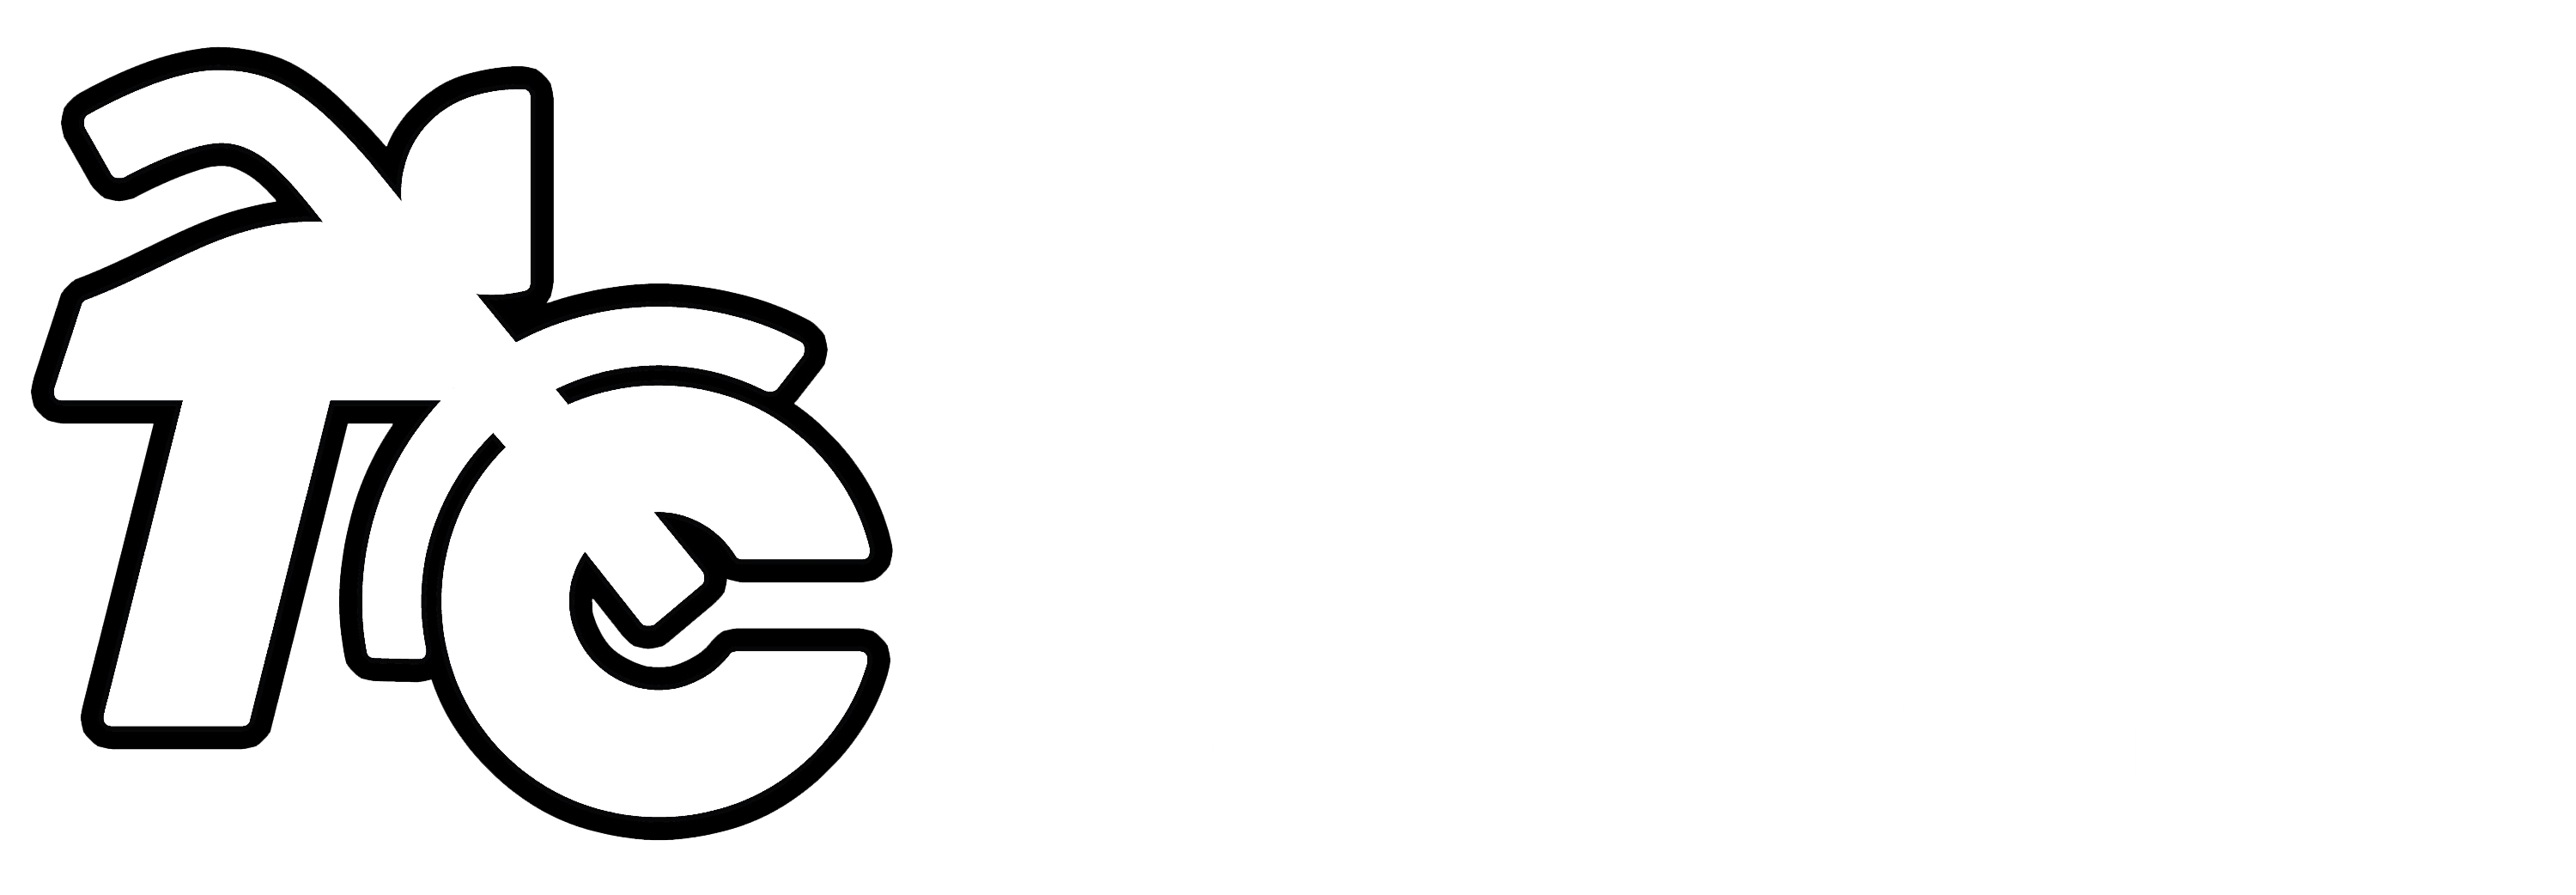 Town and Country Sports Center